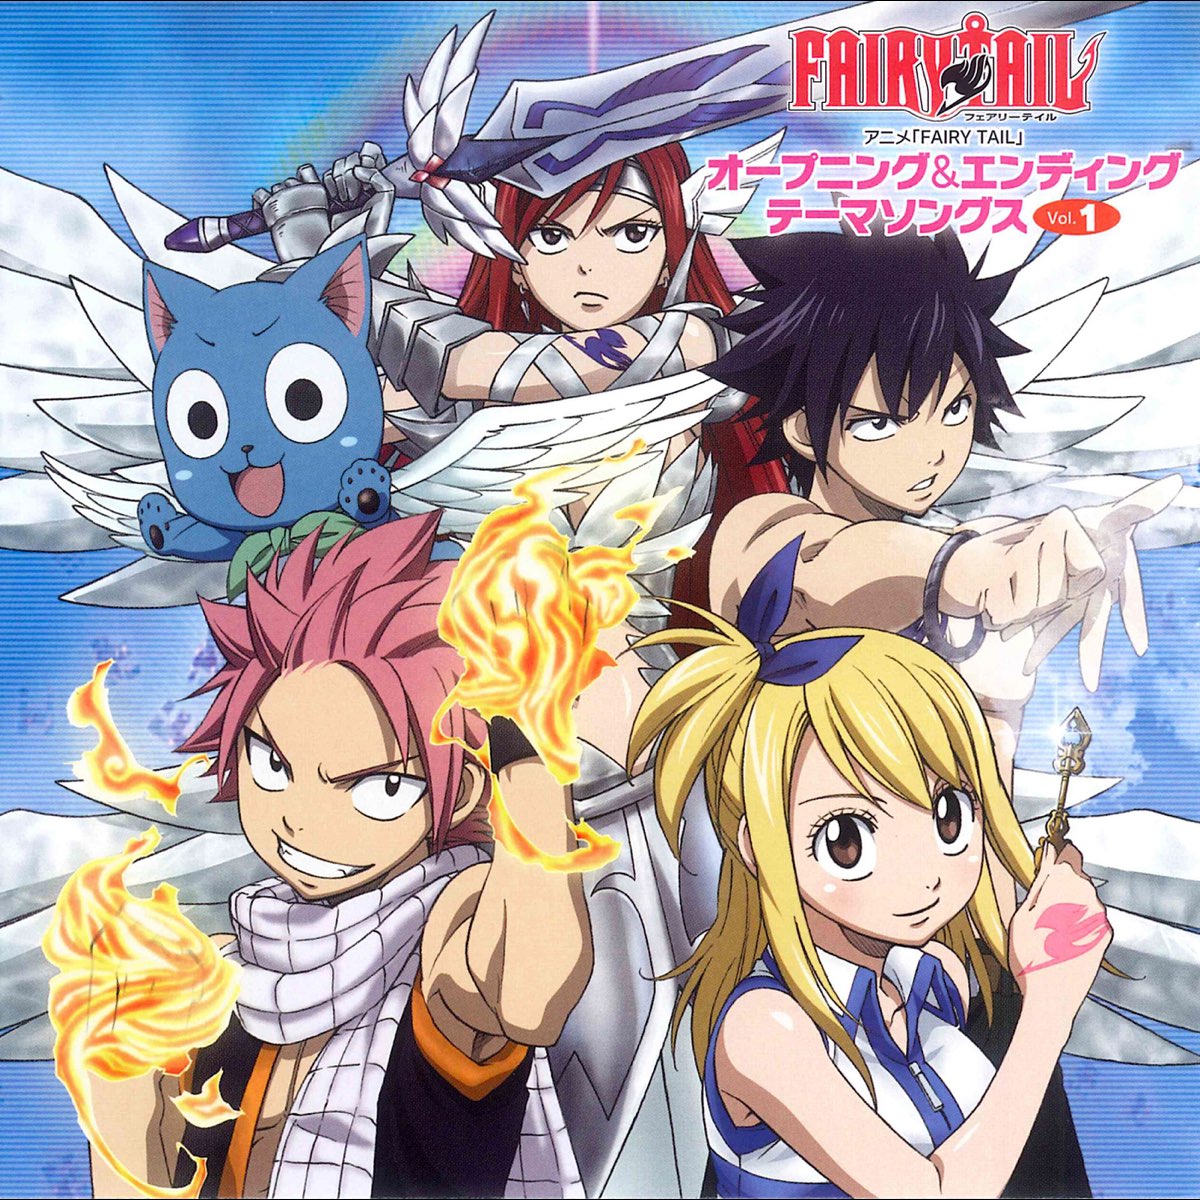 Tv Anime Fairy Tail Op Ed Theme Songs Vol 1 By Various Artists On Apple Music